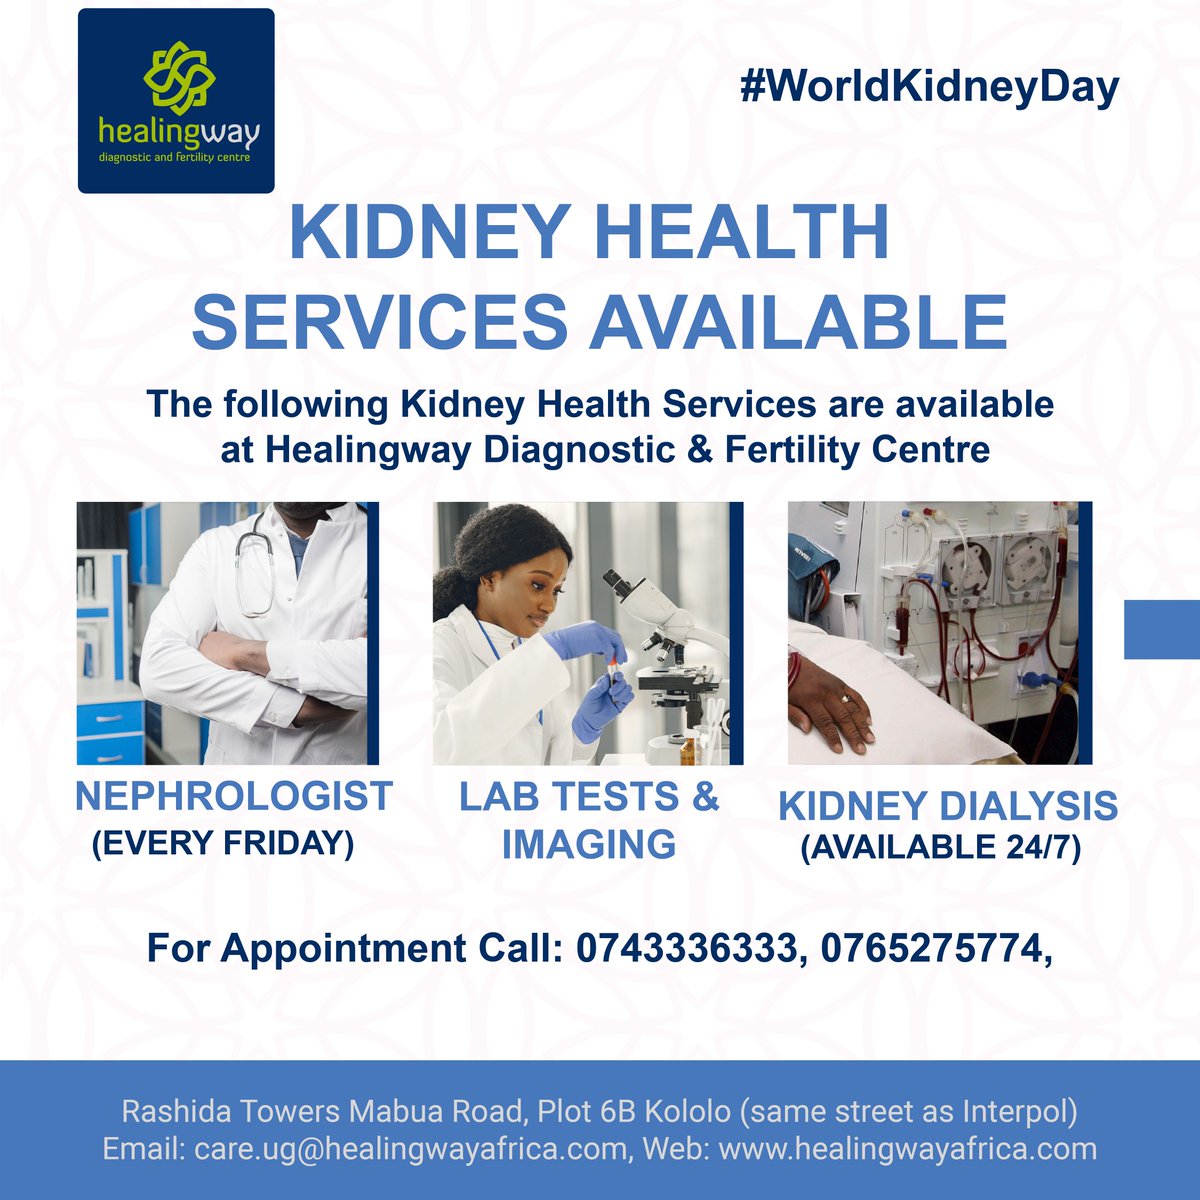 Join us in recognizing #WorldKidneyDay, a vital global health initiative spotlighting kidney health and efforts to combat kidney disease worldwide. Together, let's raise awareness and support for healthier kidneys everywhere! #KidneyAwareness #HealthForAll